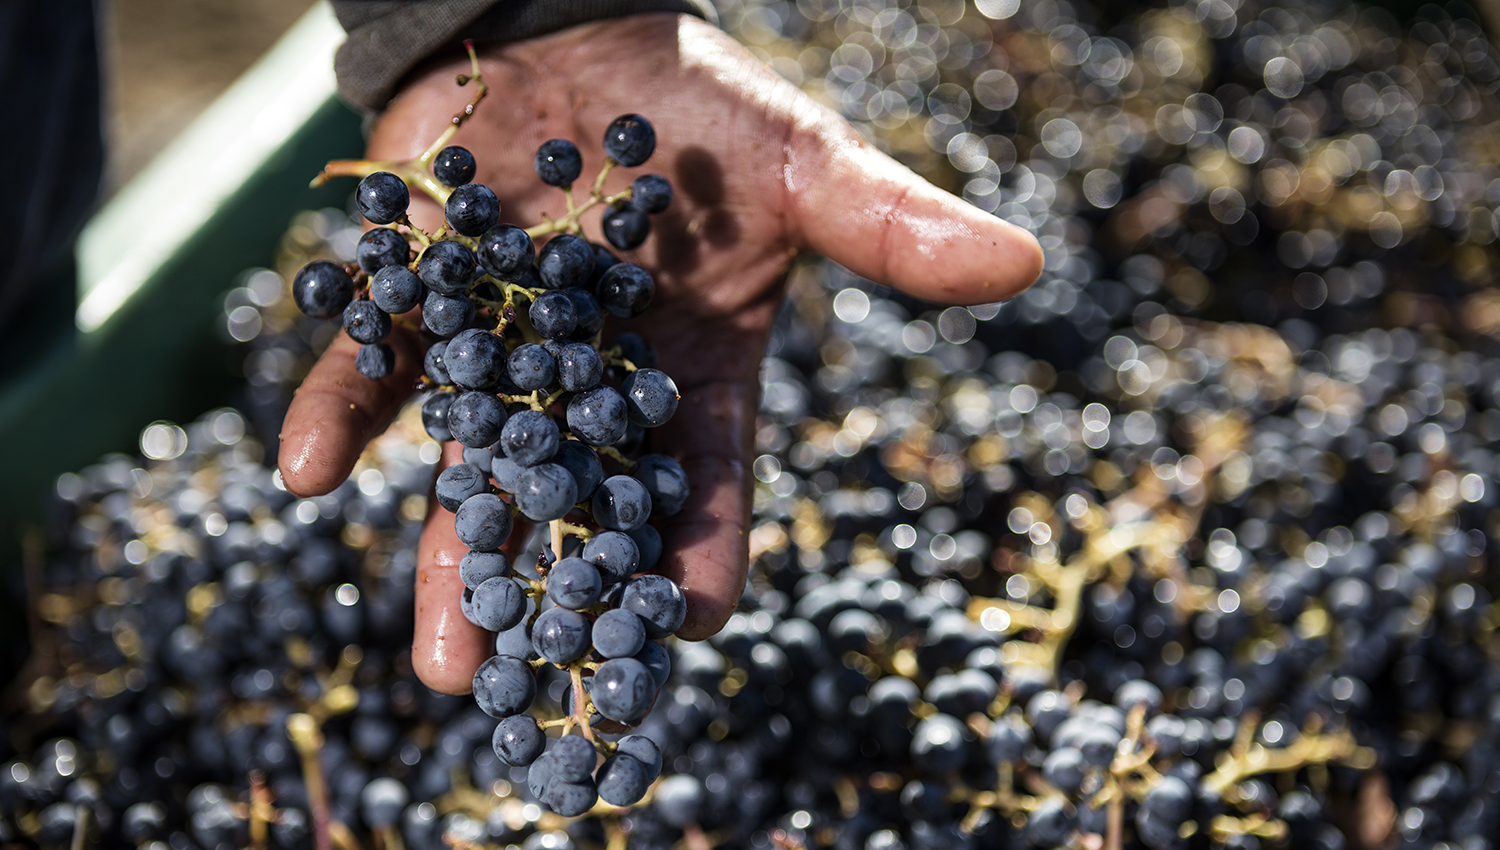 A hand checking the quality of freshly picked grapes